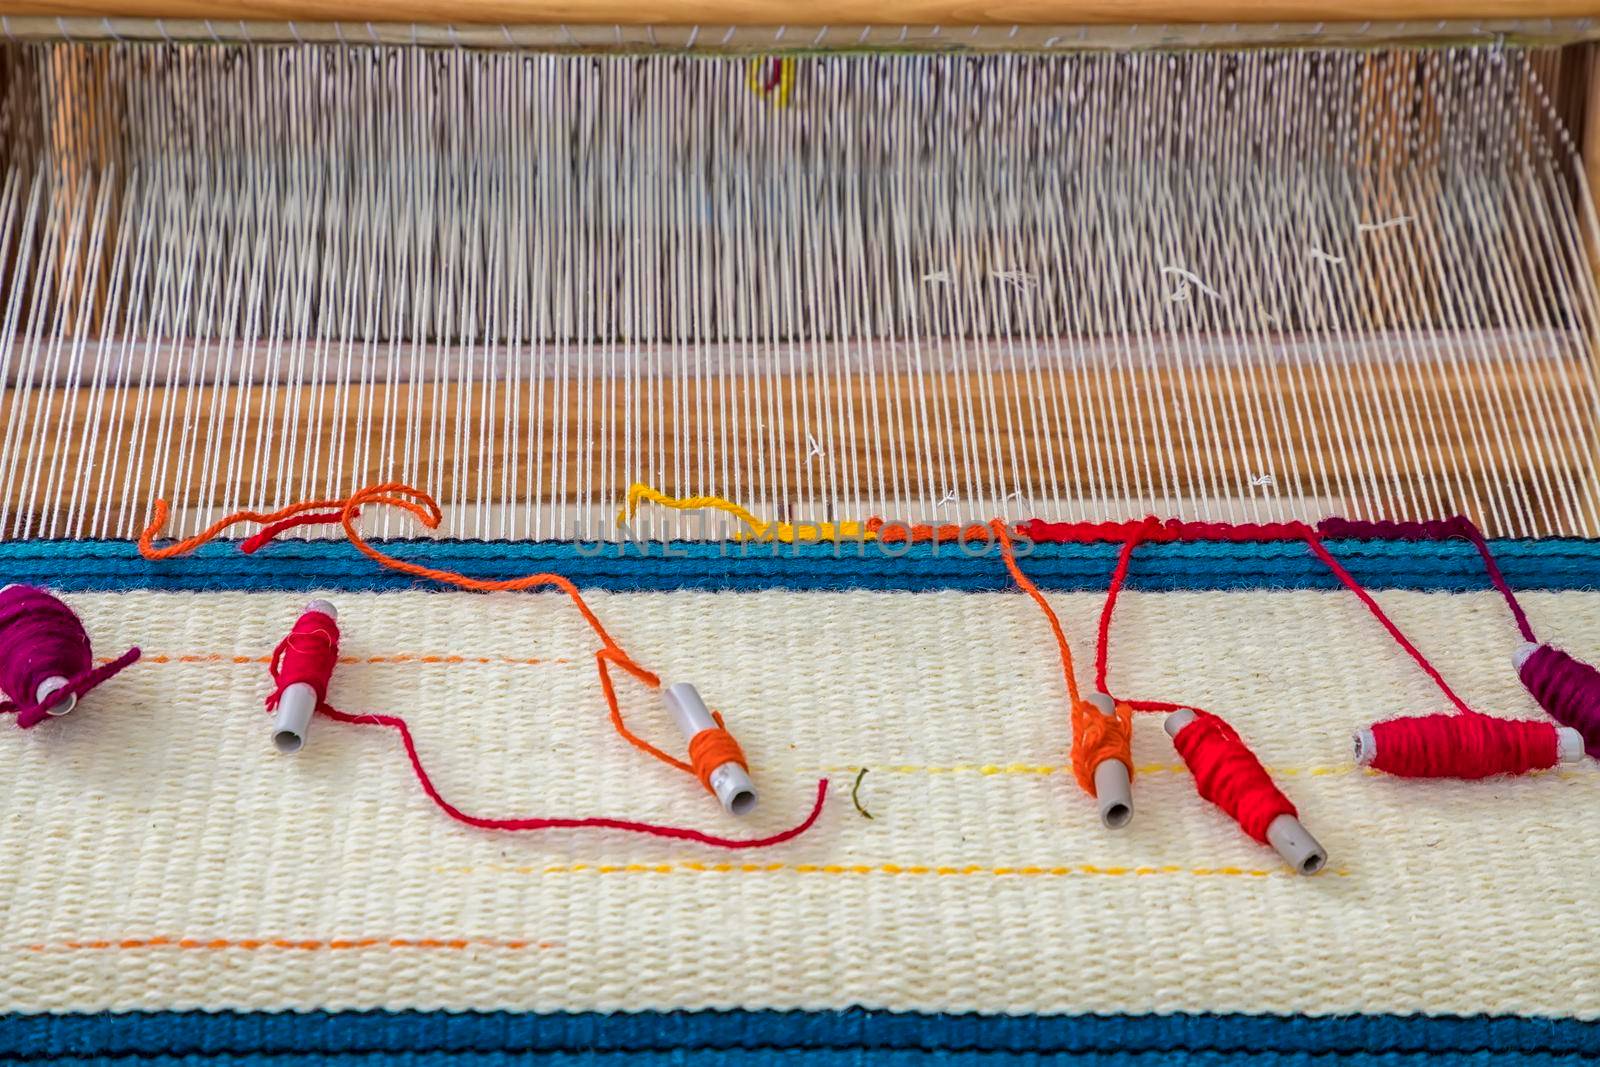 A traditional colorful vintage weaving loom. by EdVal